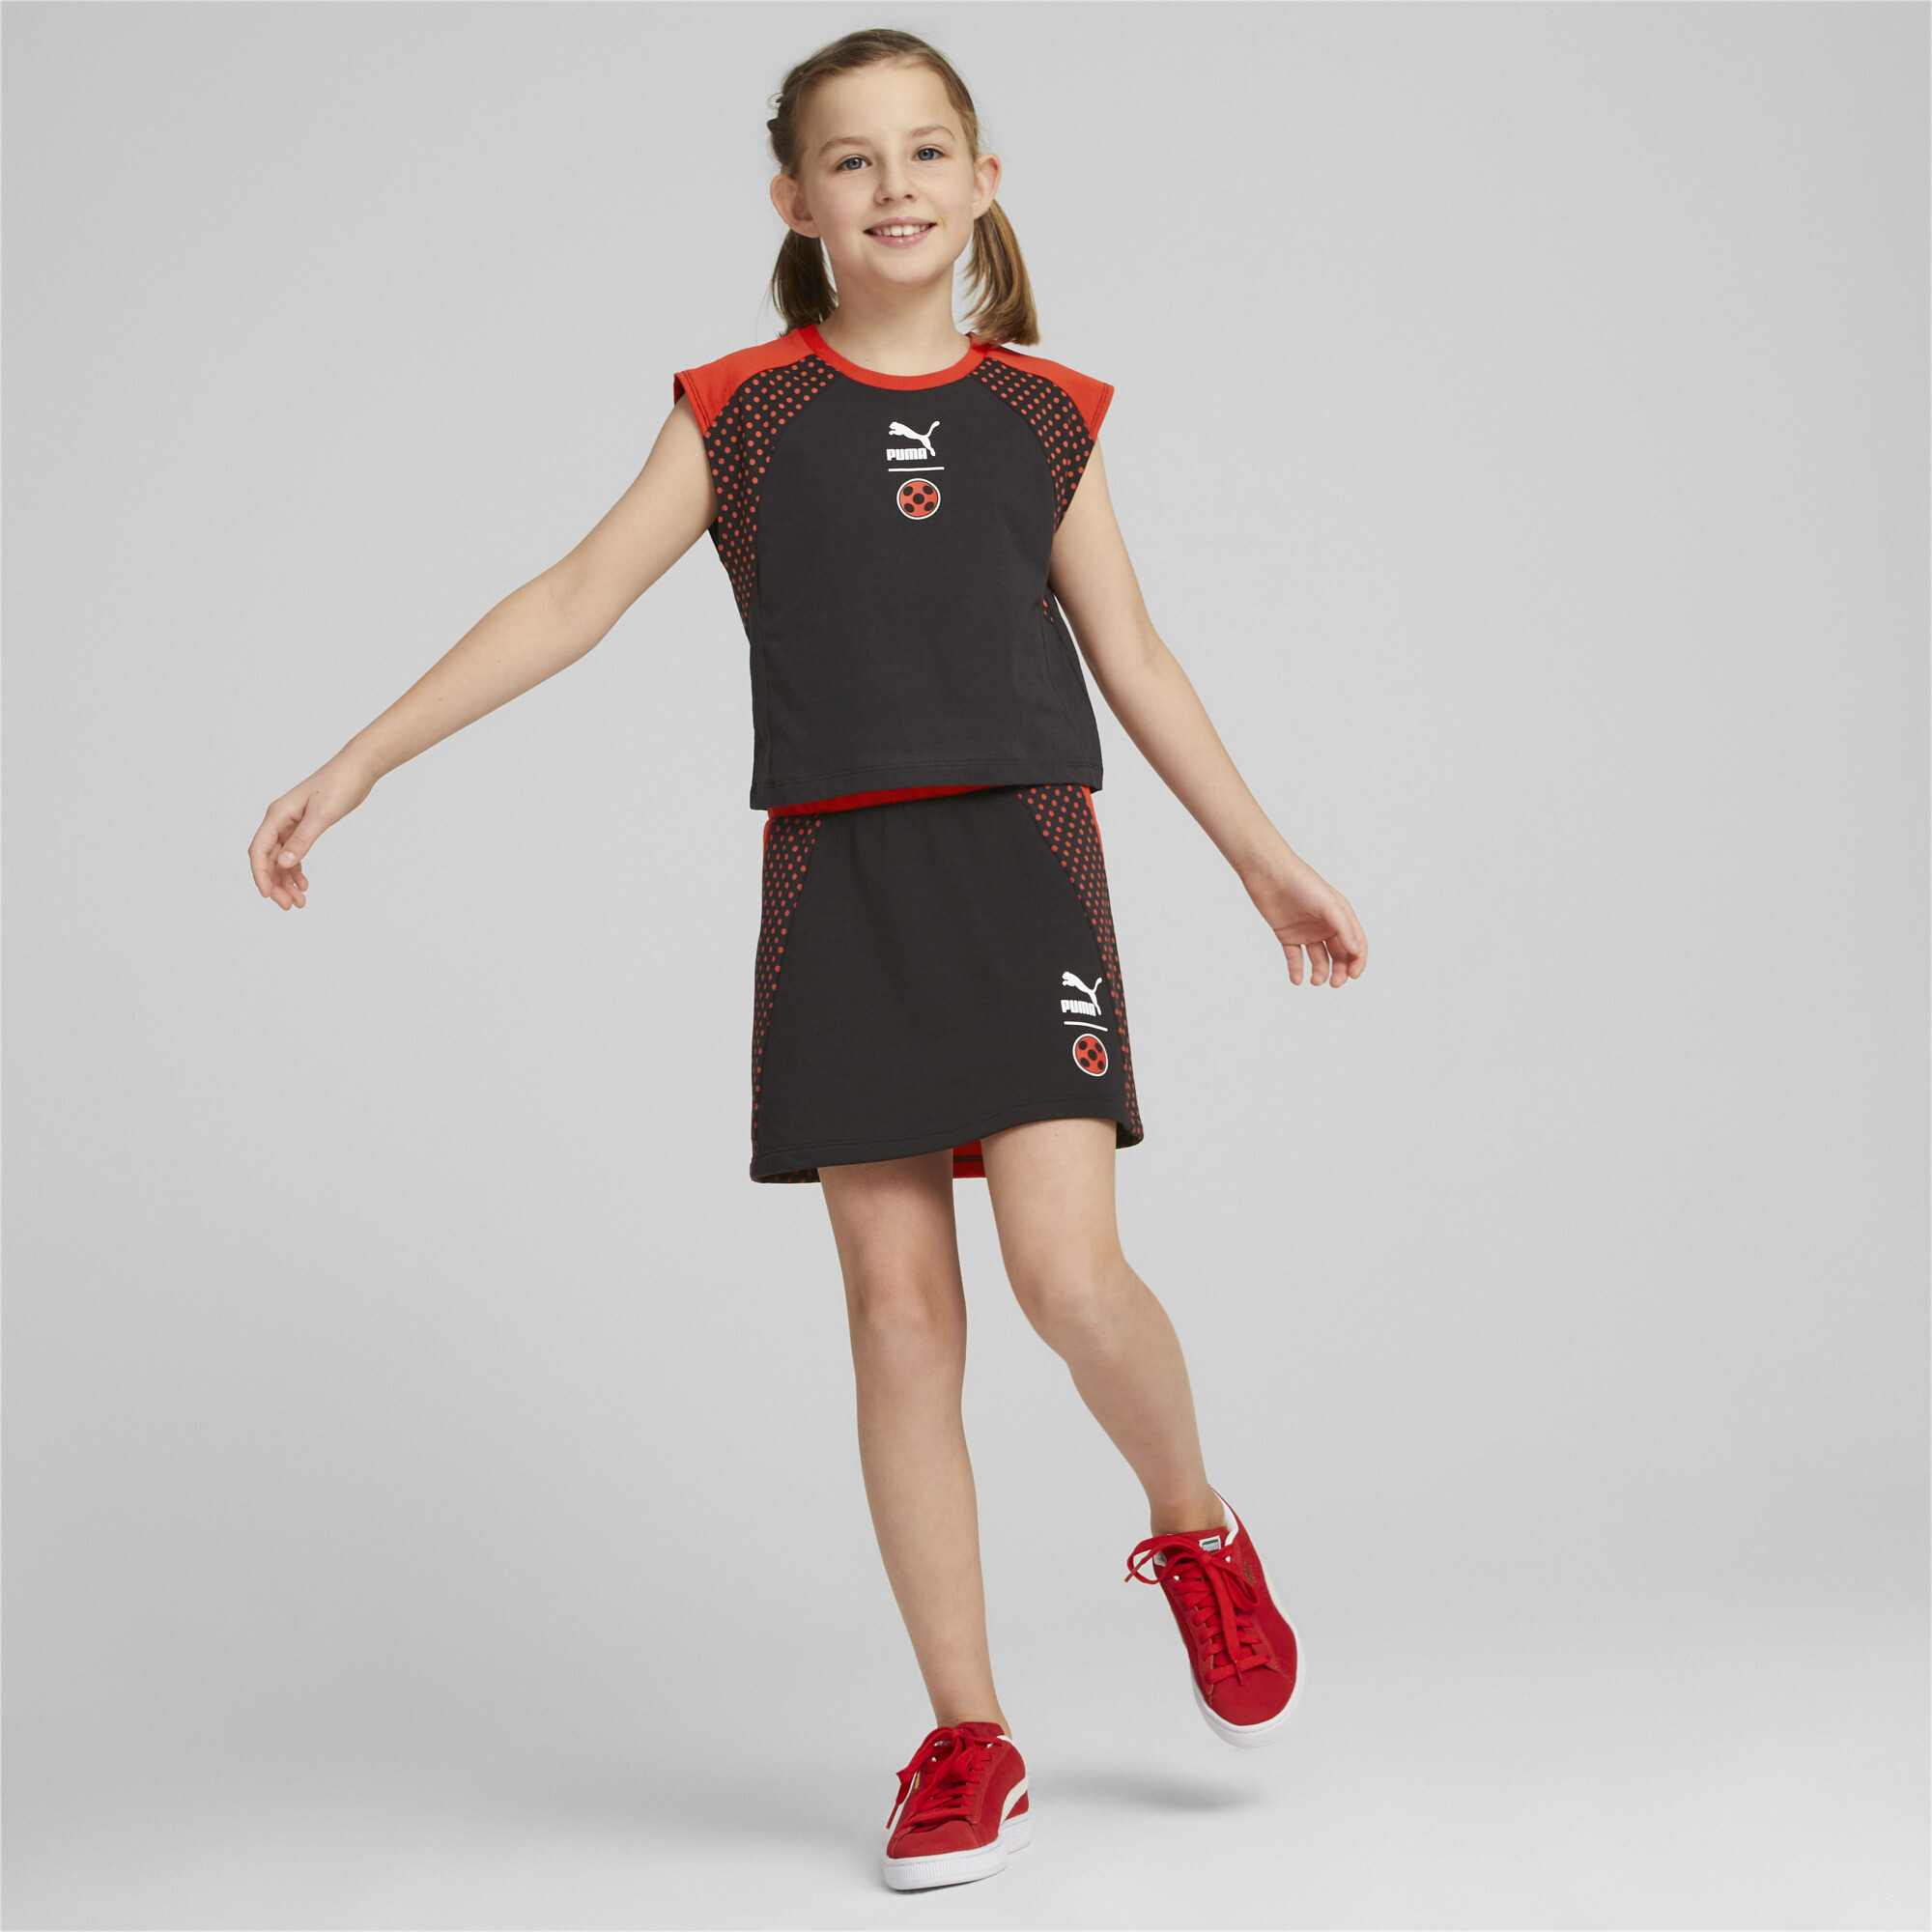 PUMA X MIRACULOUS Skirt In Black, Size 7-8 Youth